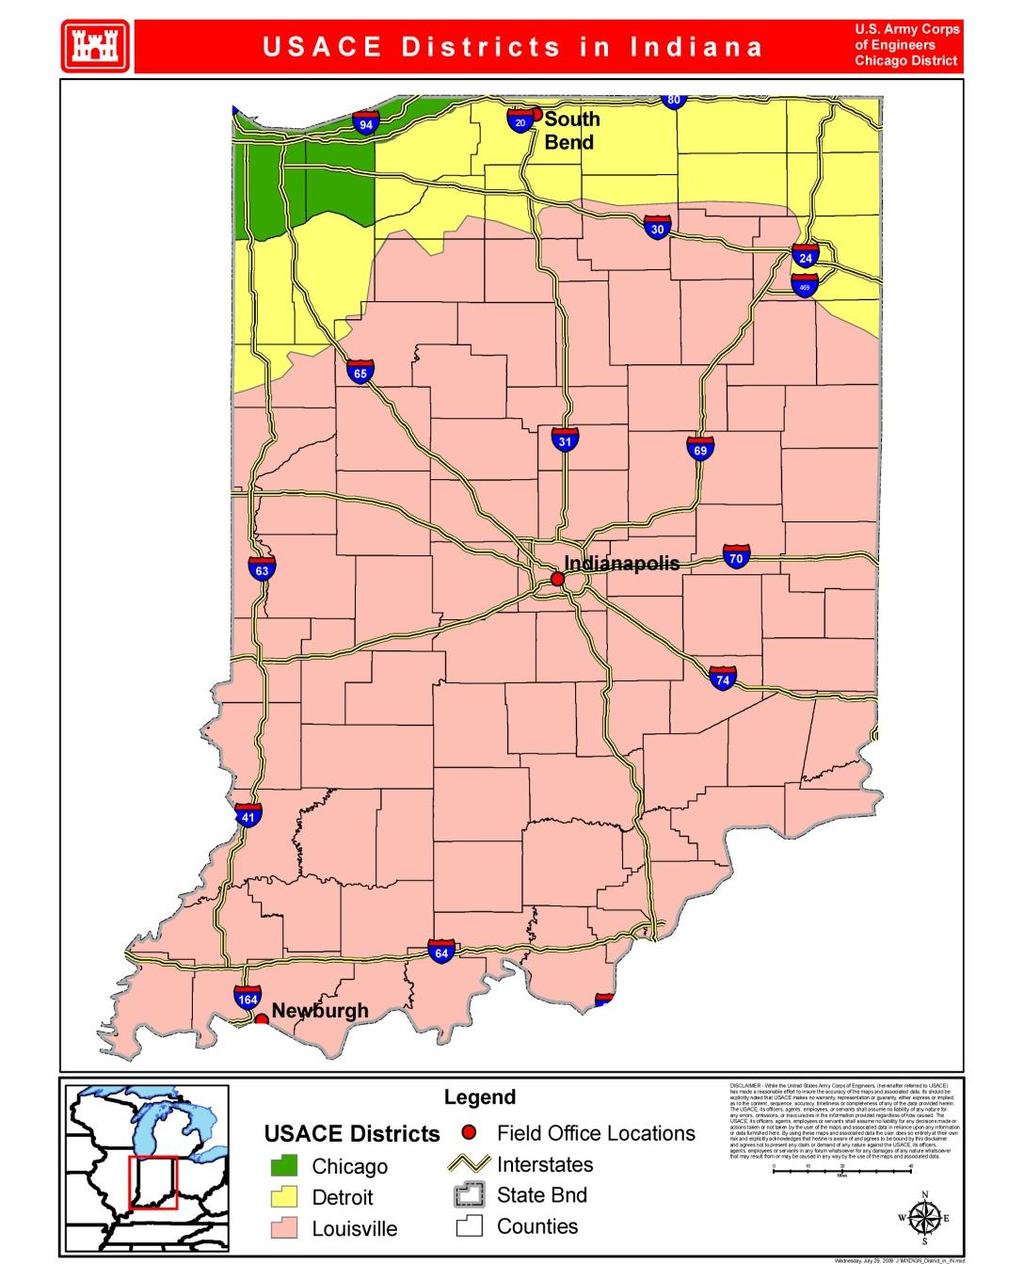 PERMITTING USACE DISTRICTS IN INDIANA The